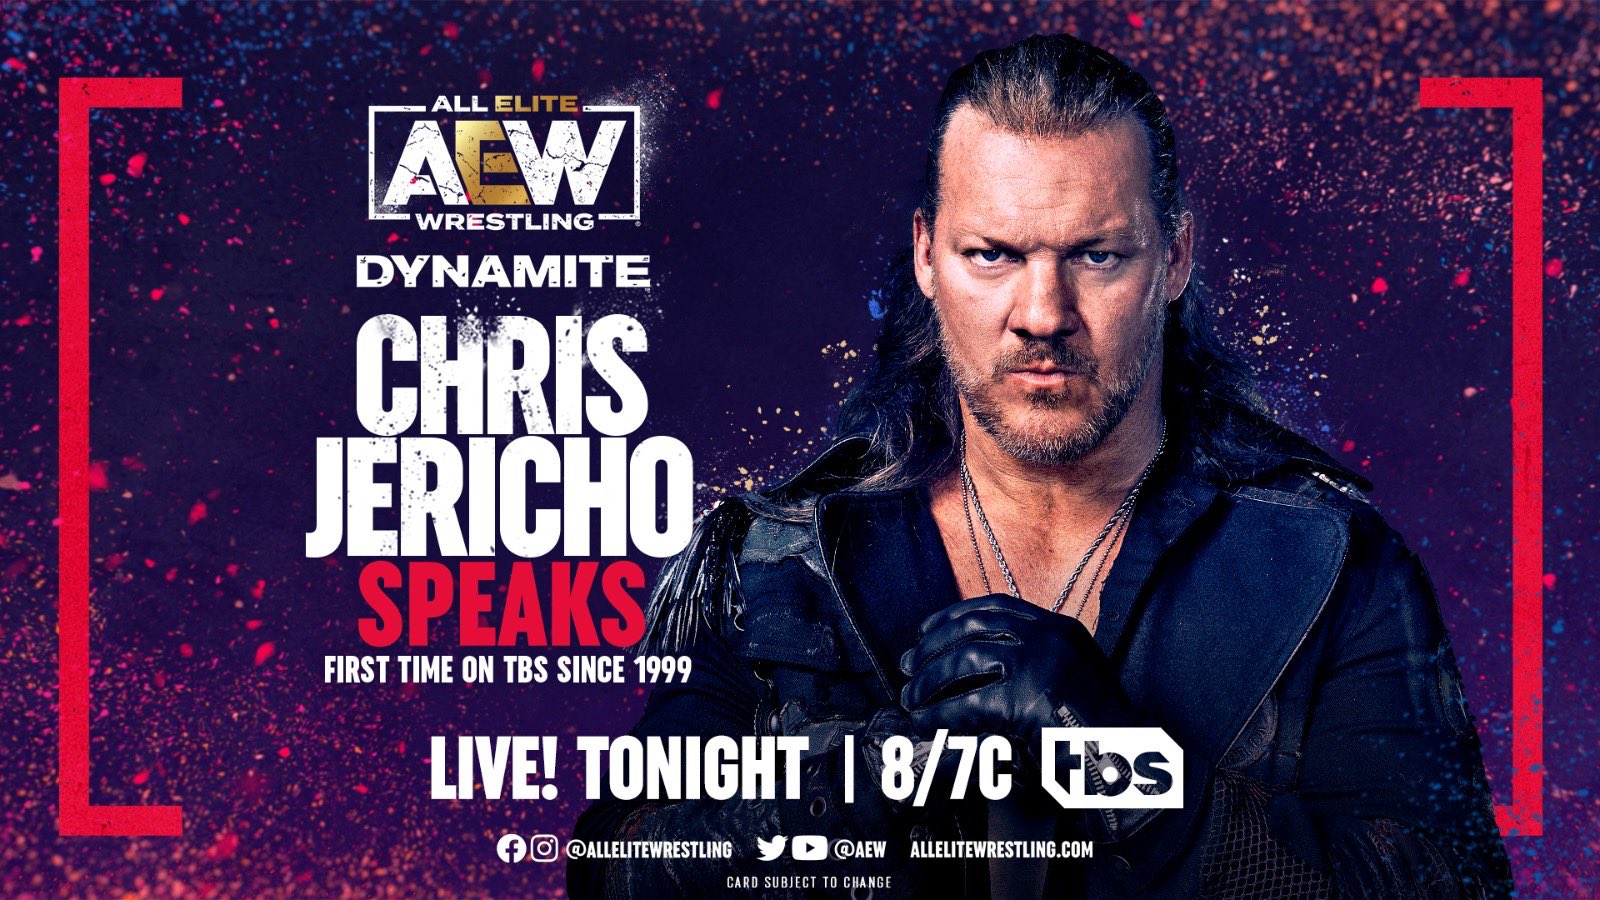 All Elite Wrestling on Twitter: "TONIGHT for the first time since 1999, @IAmJericho will be on TBS, LIVE on the #AEWDynamite on @TBSNetwork and the #AEWDynamite of 2022! What will